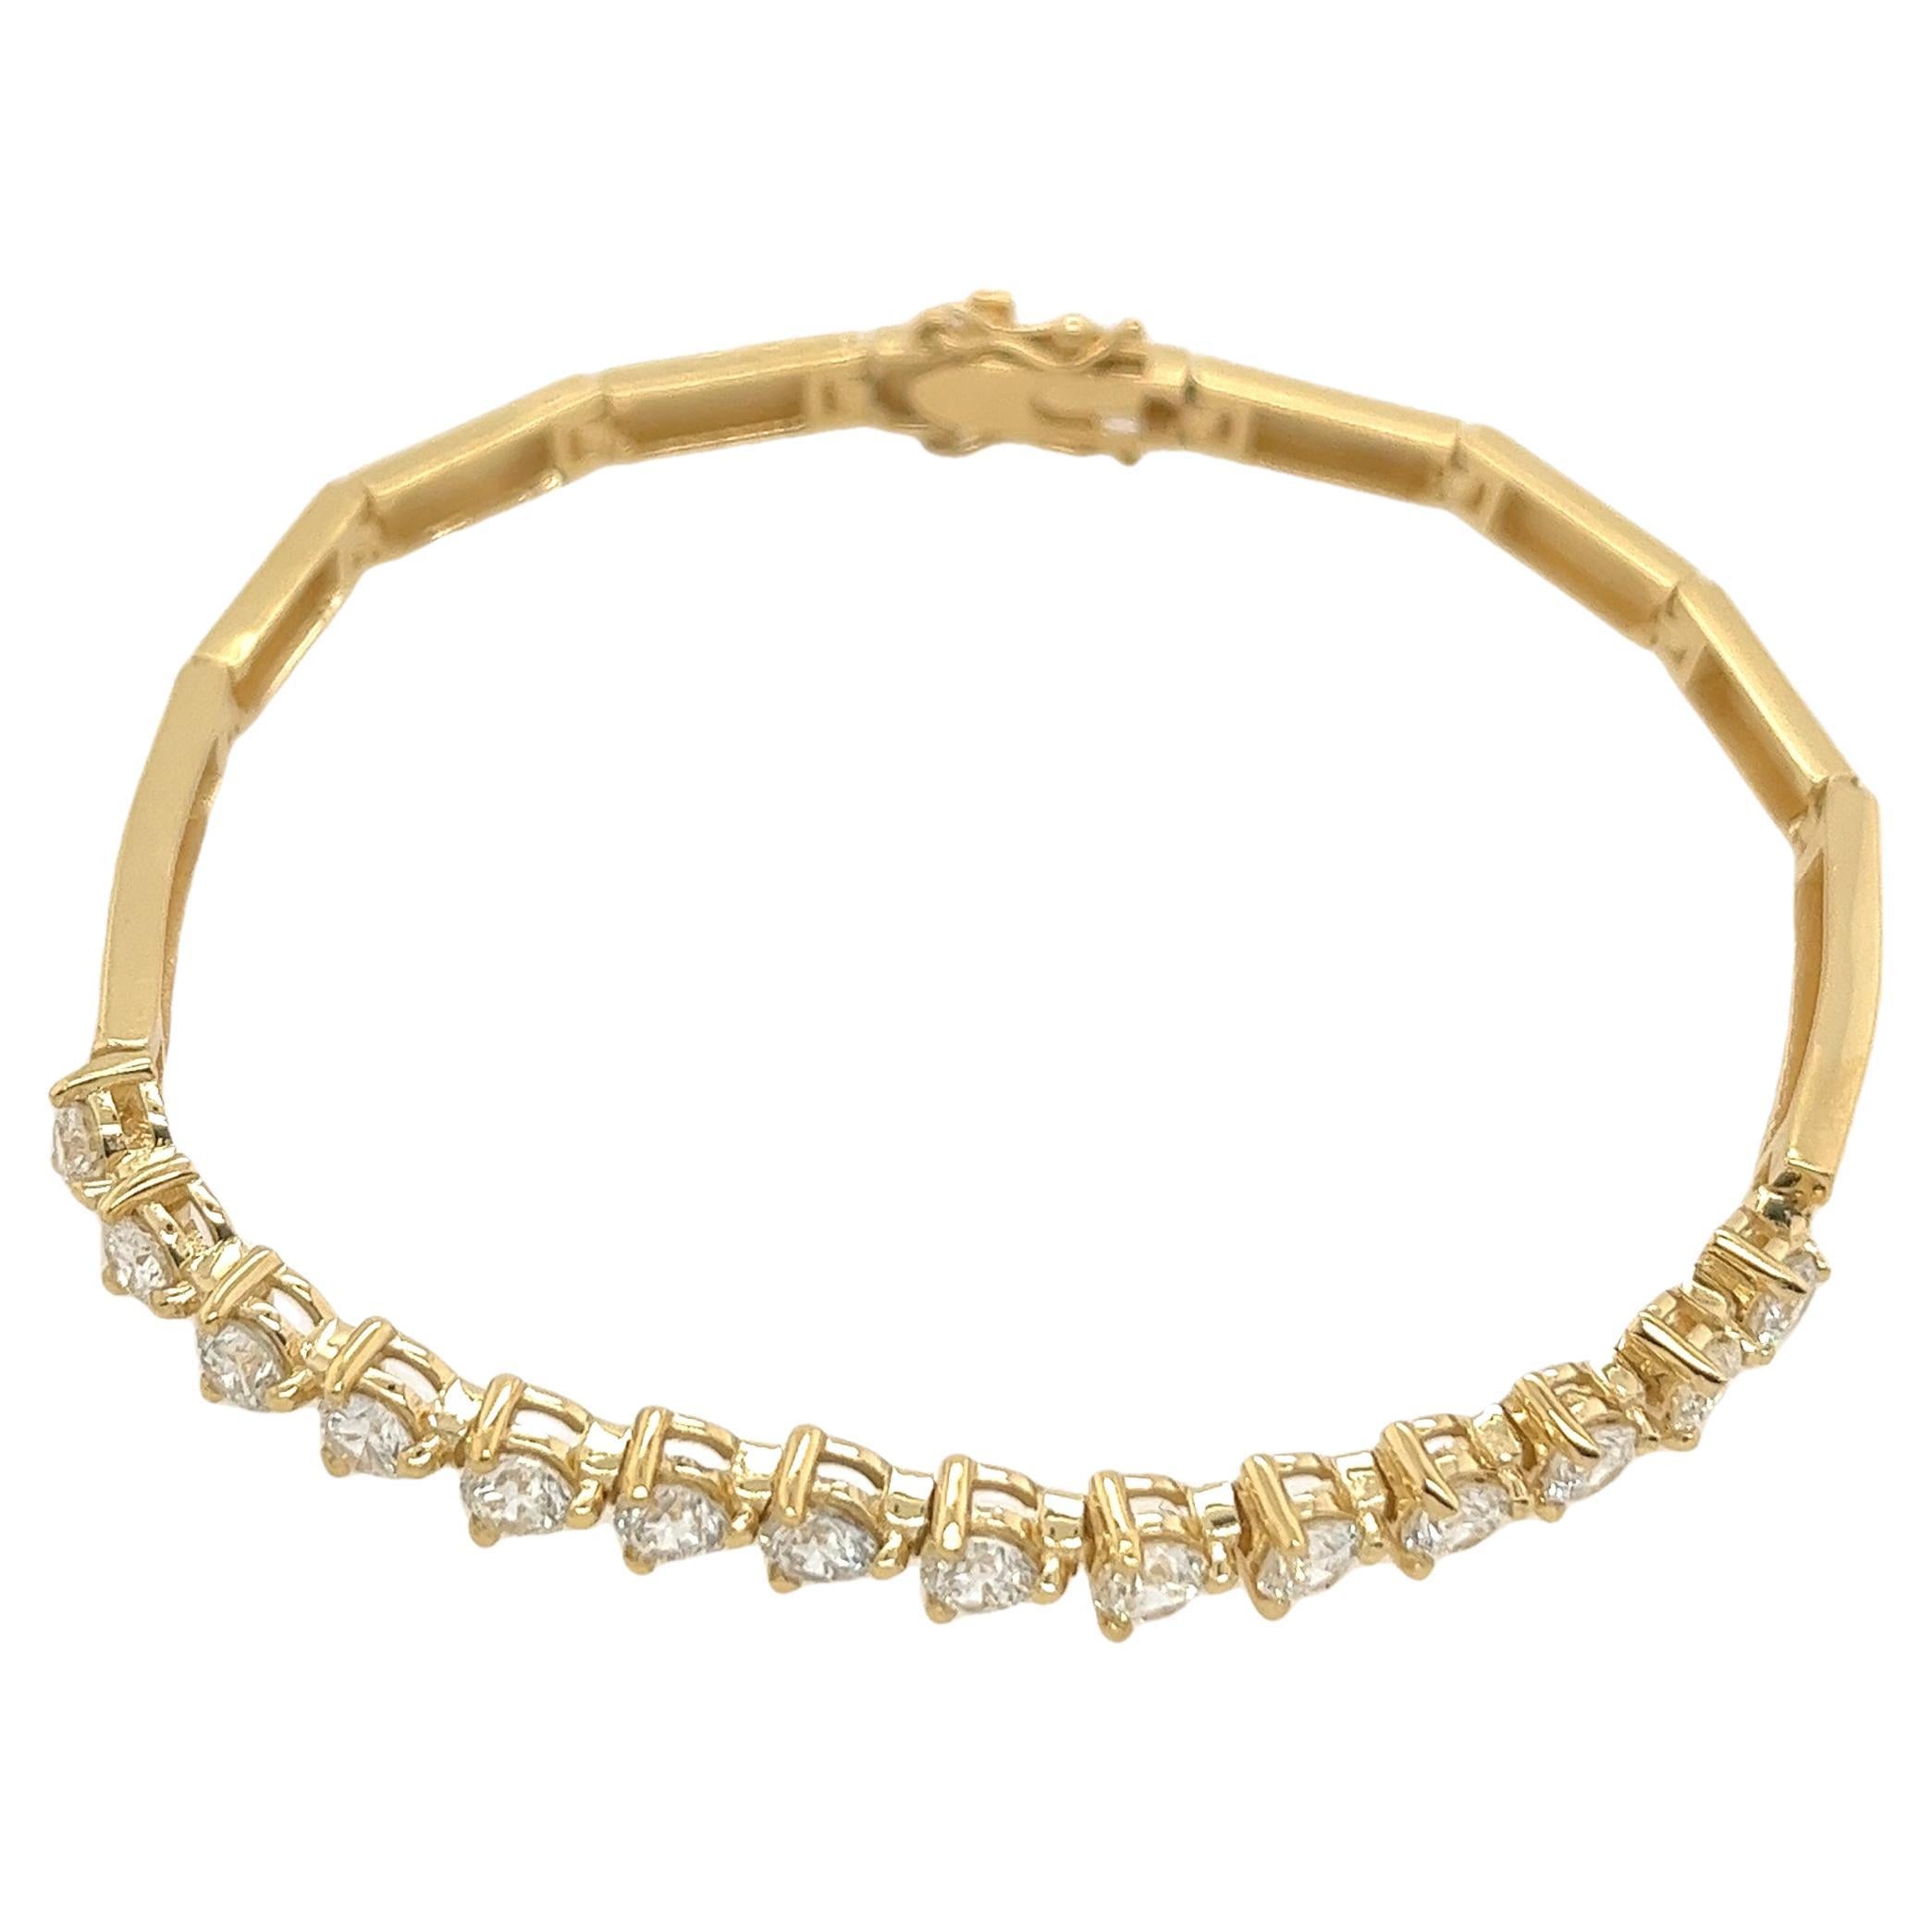 This bracelet is made of 18ct yellow gold and set with 14 round brilliant cut natural diamonds, and has a beautiful shiny finish. This design is ideal for everyday wear.

Total Diamond Weight: 2.25ct
Total Weight: 12.6g
Bracelet Length: 7